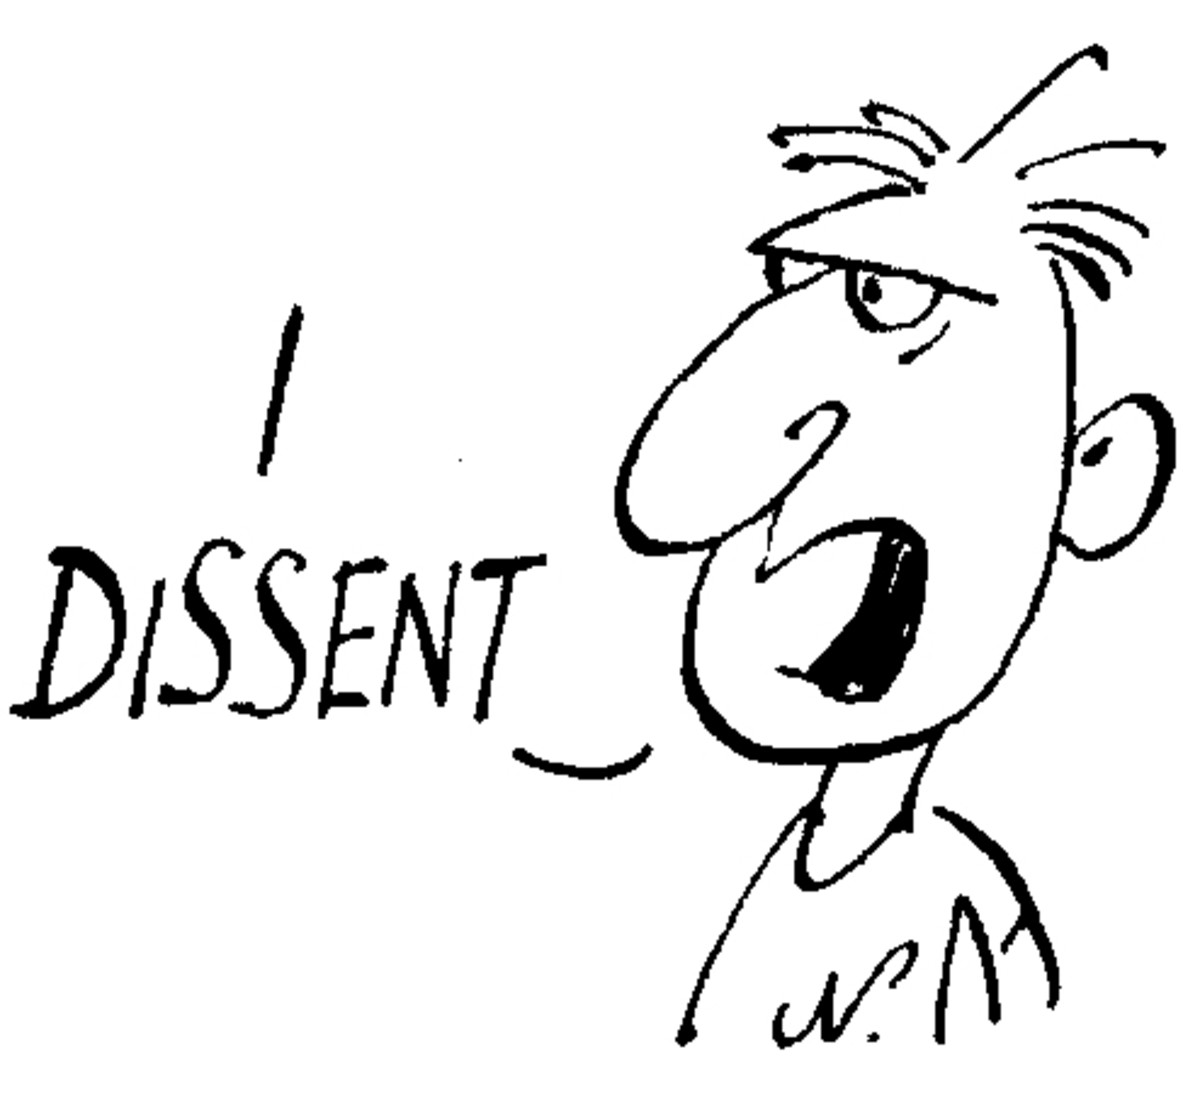 what does dissenting mean